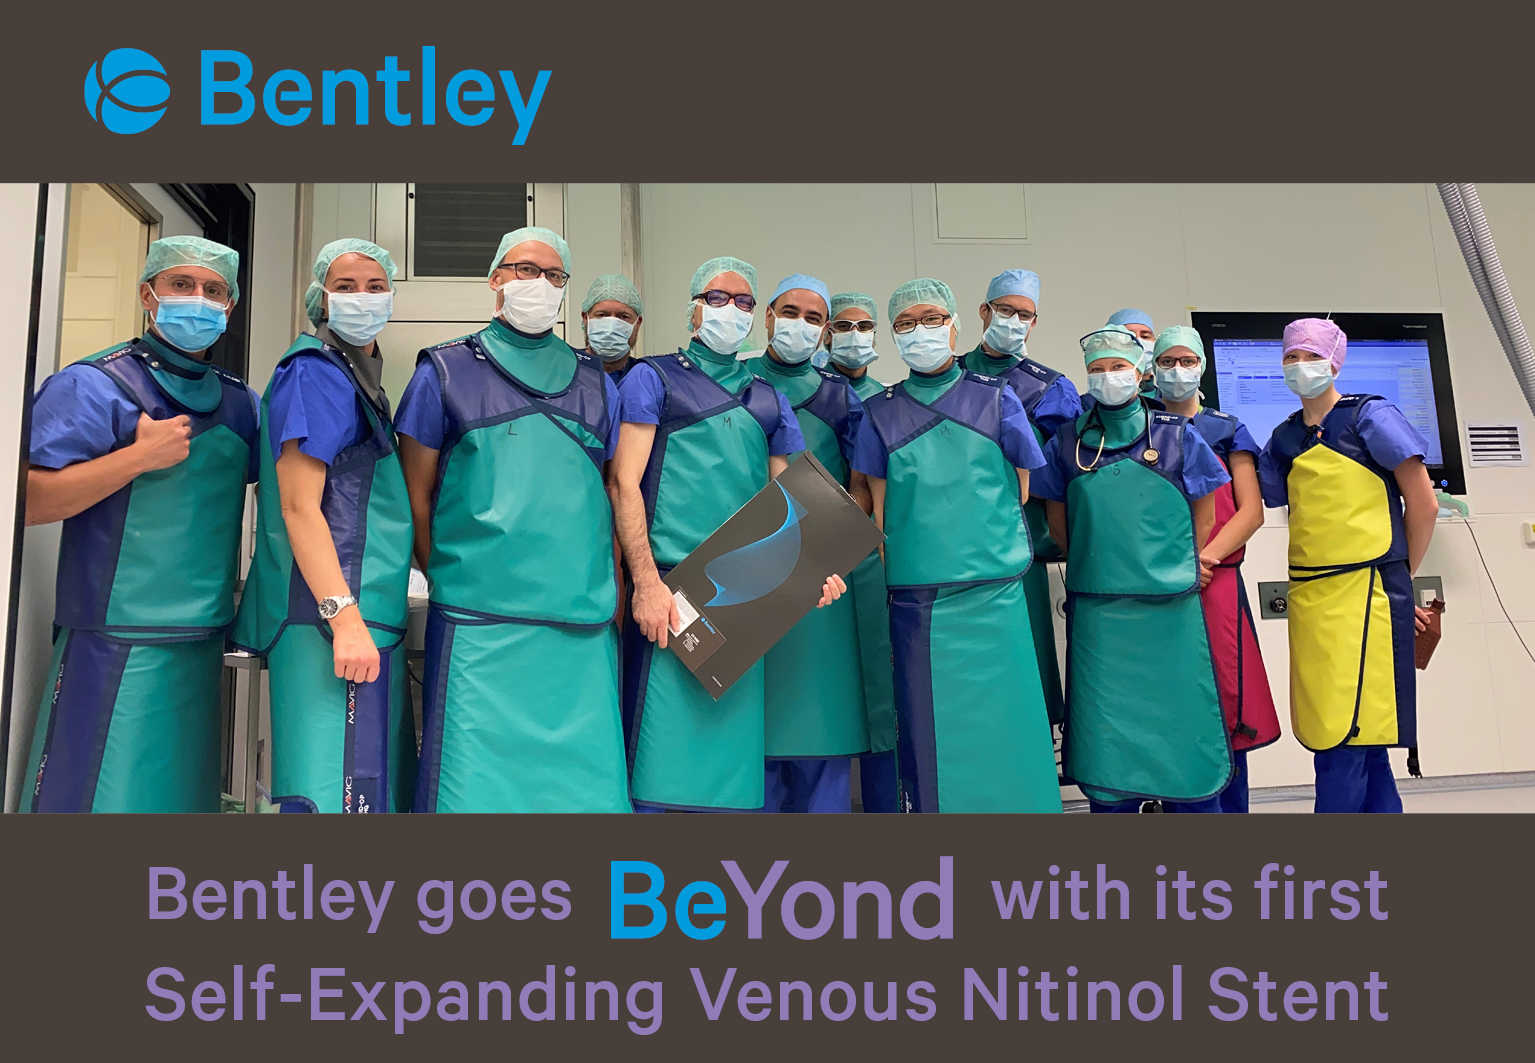 Bentley enters the venous world with the launch and First-in-Man of the BeYond venous